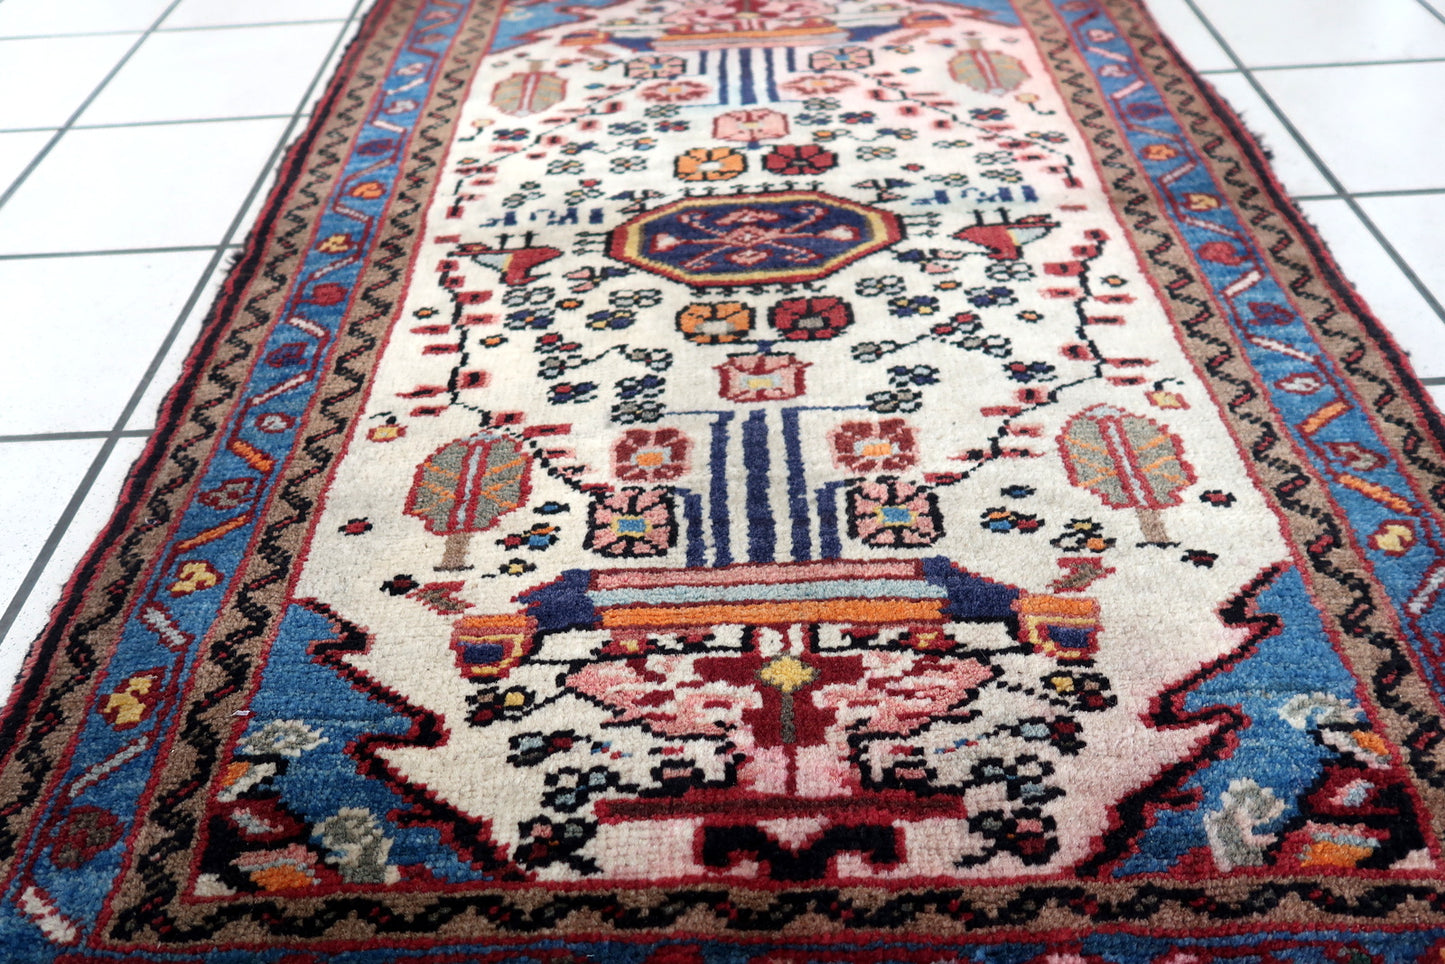 Handmade vintage Persian Mahal ug in white color and with birds design. The rug is from the end of 20th century in original condition, it has some color run.